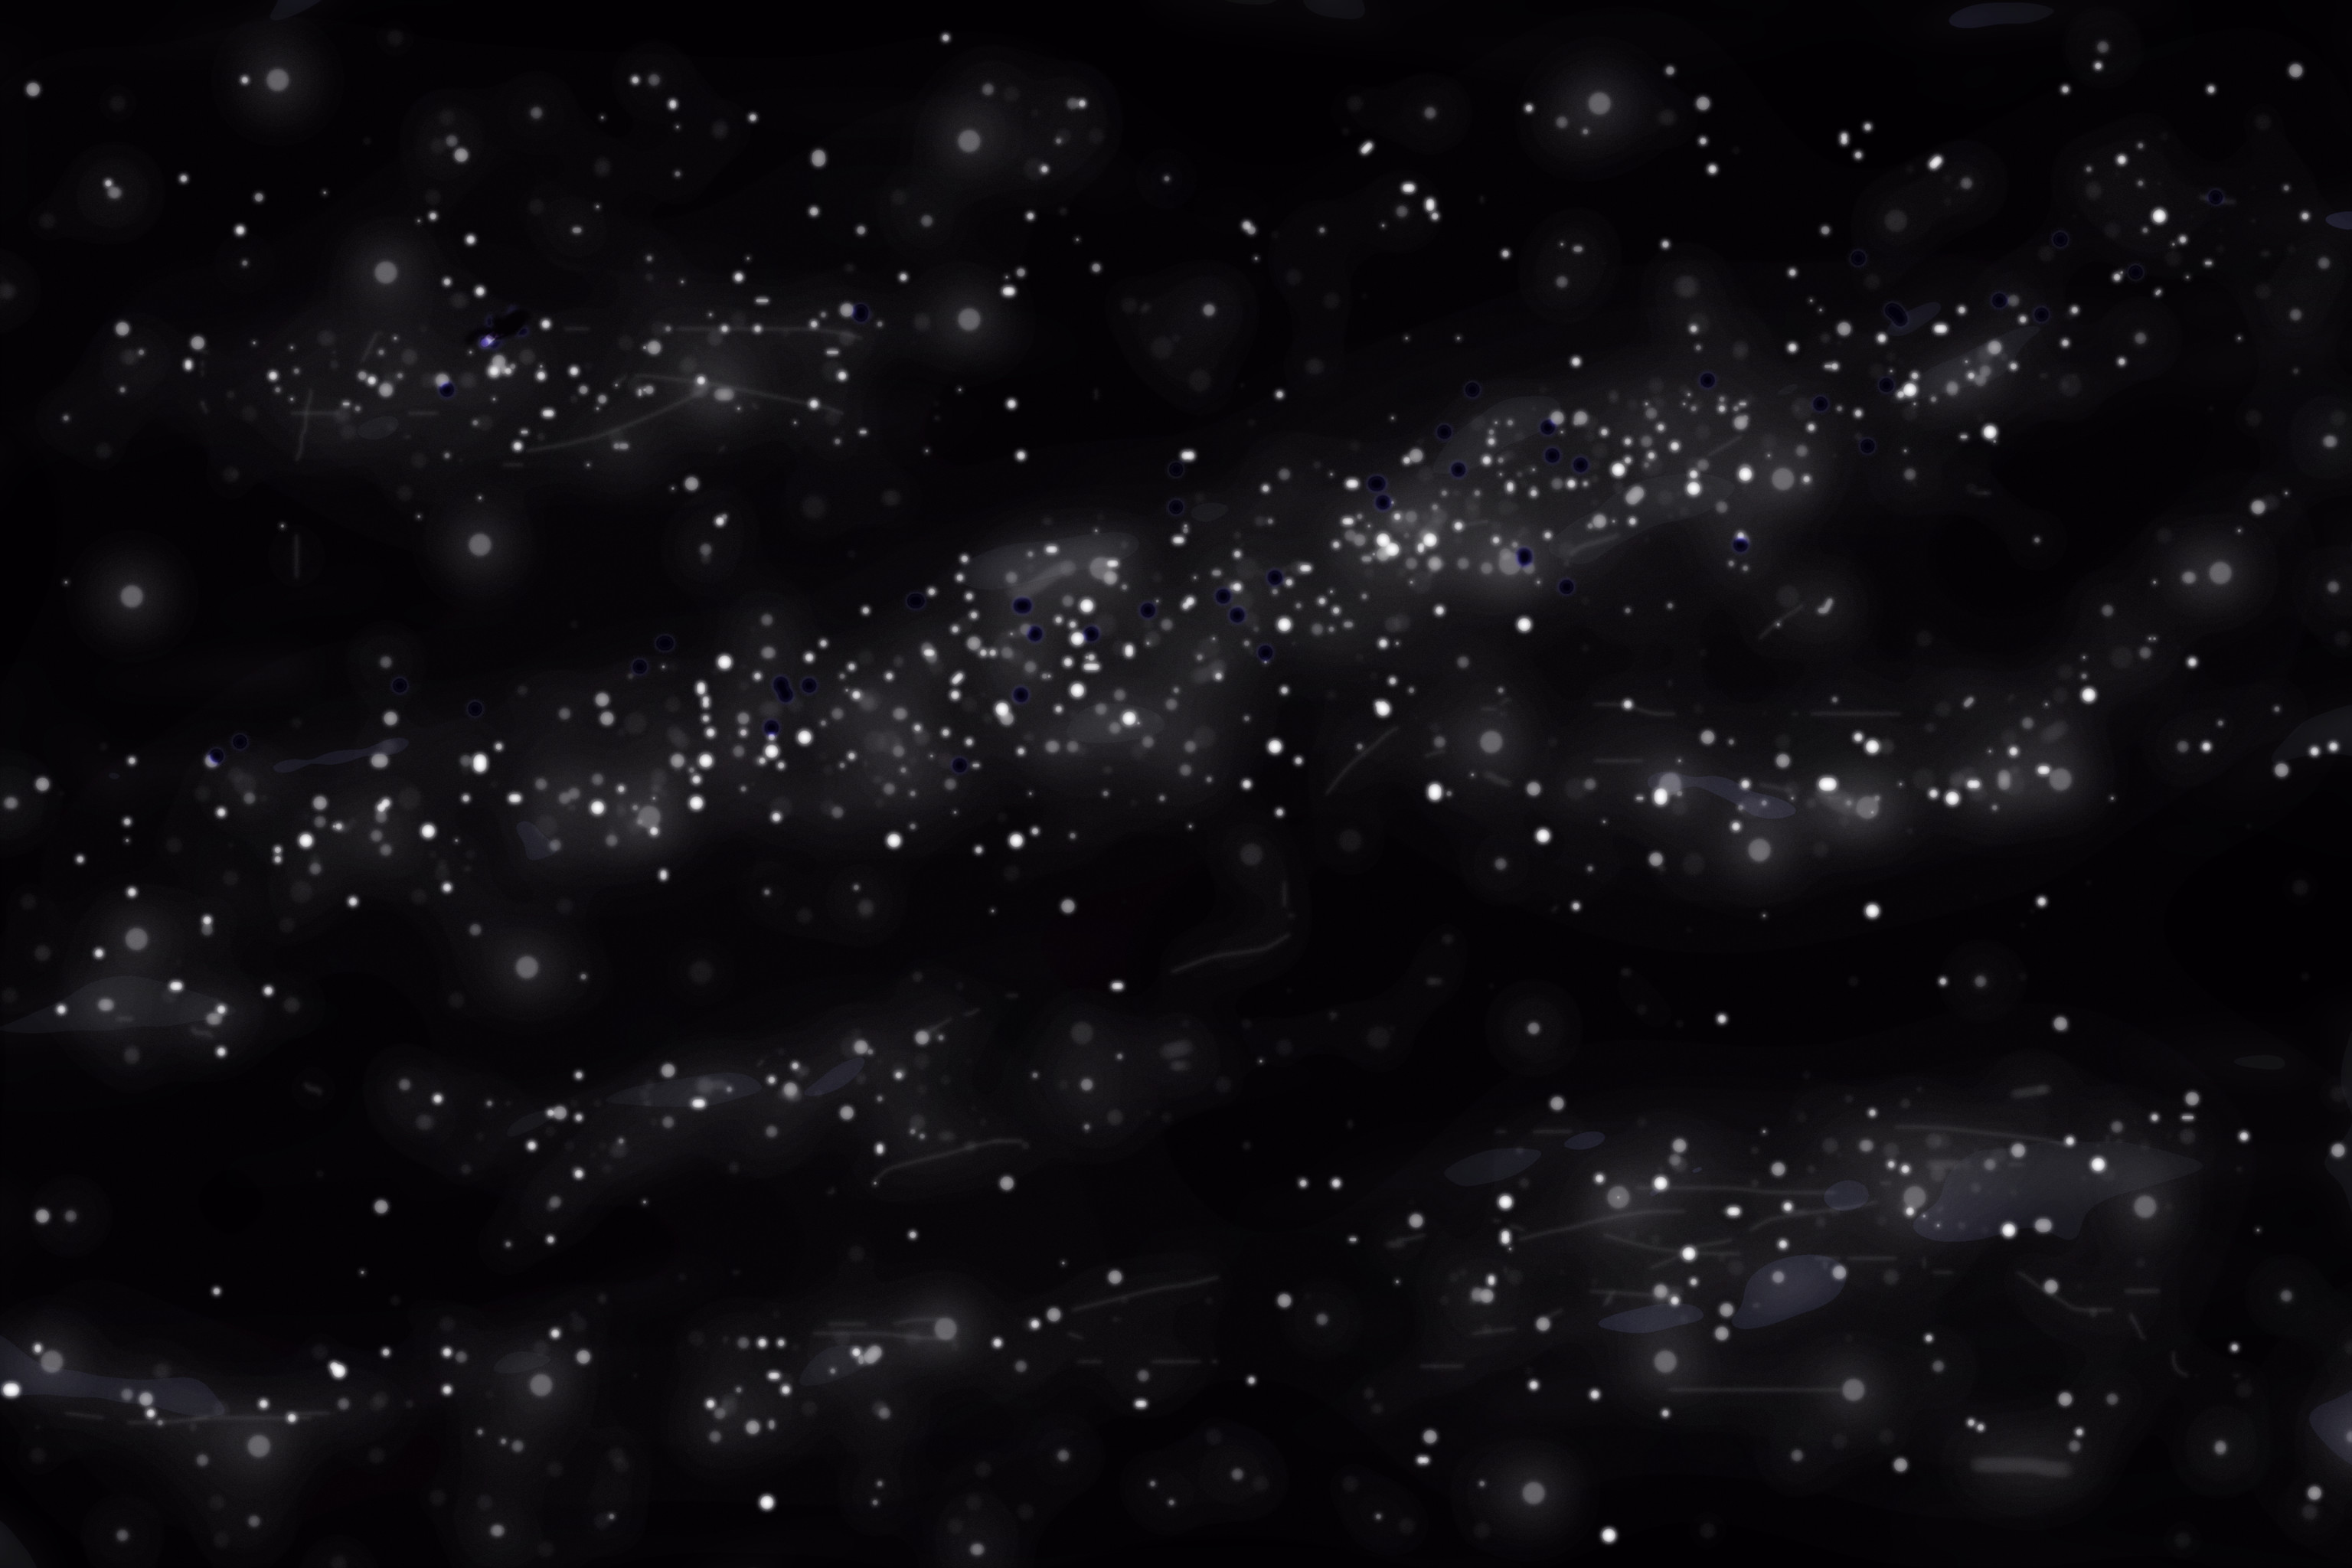 3072x2048 star field background 2 by fraterchaos on DeviantArt